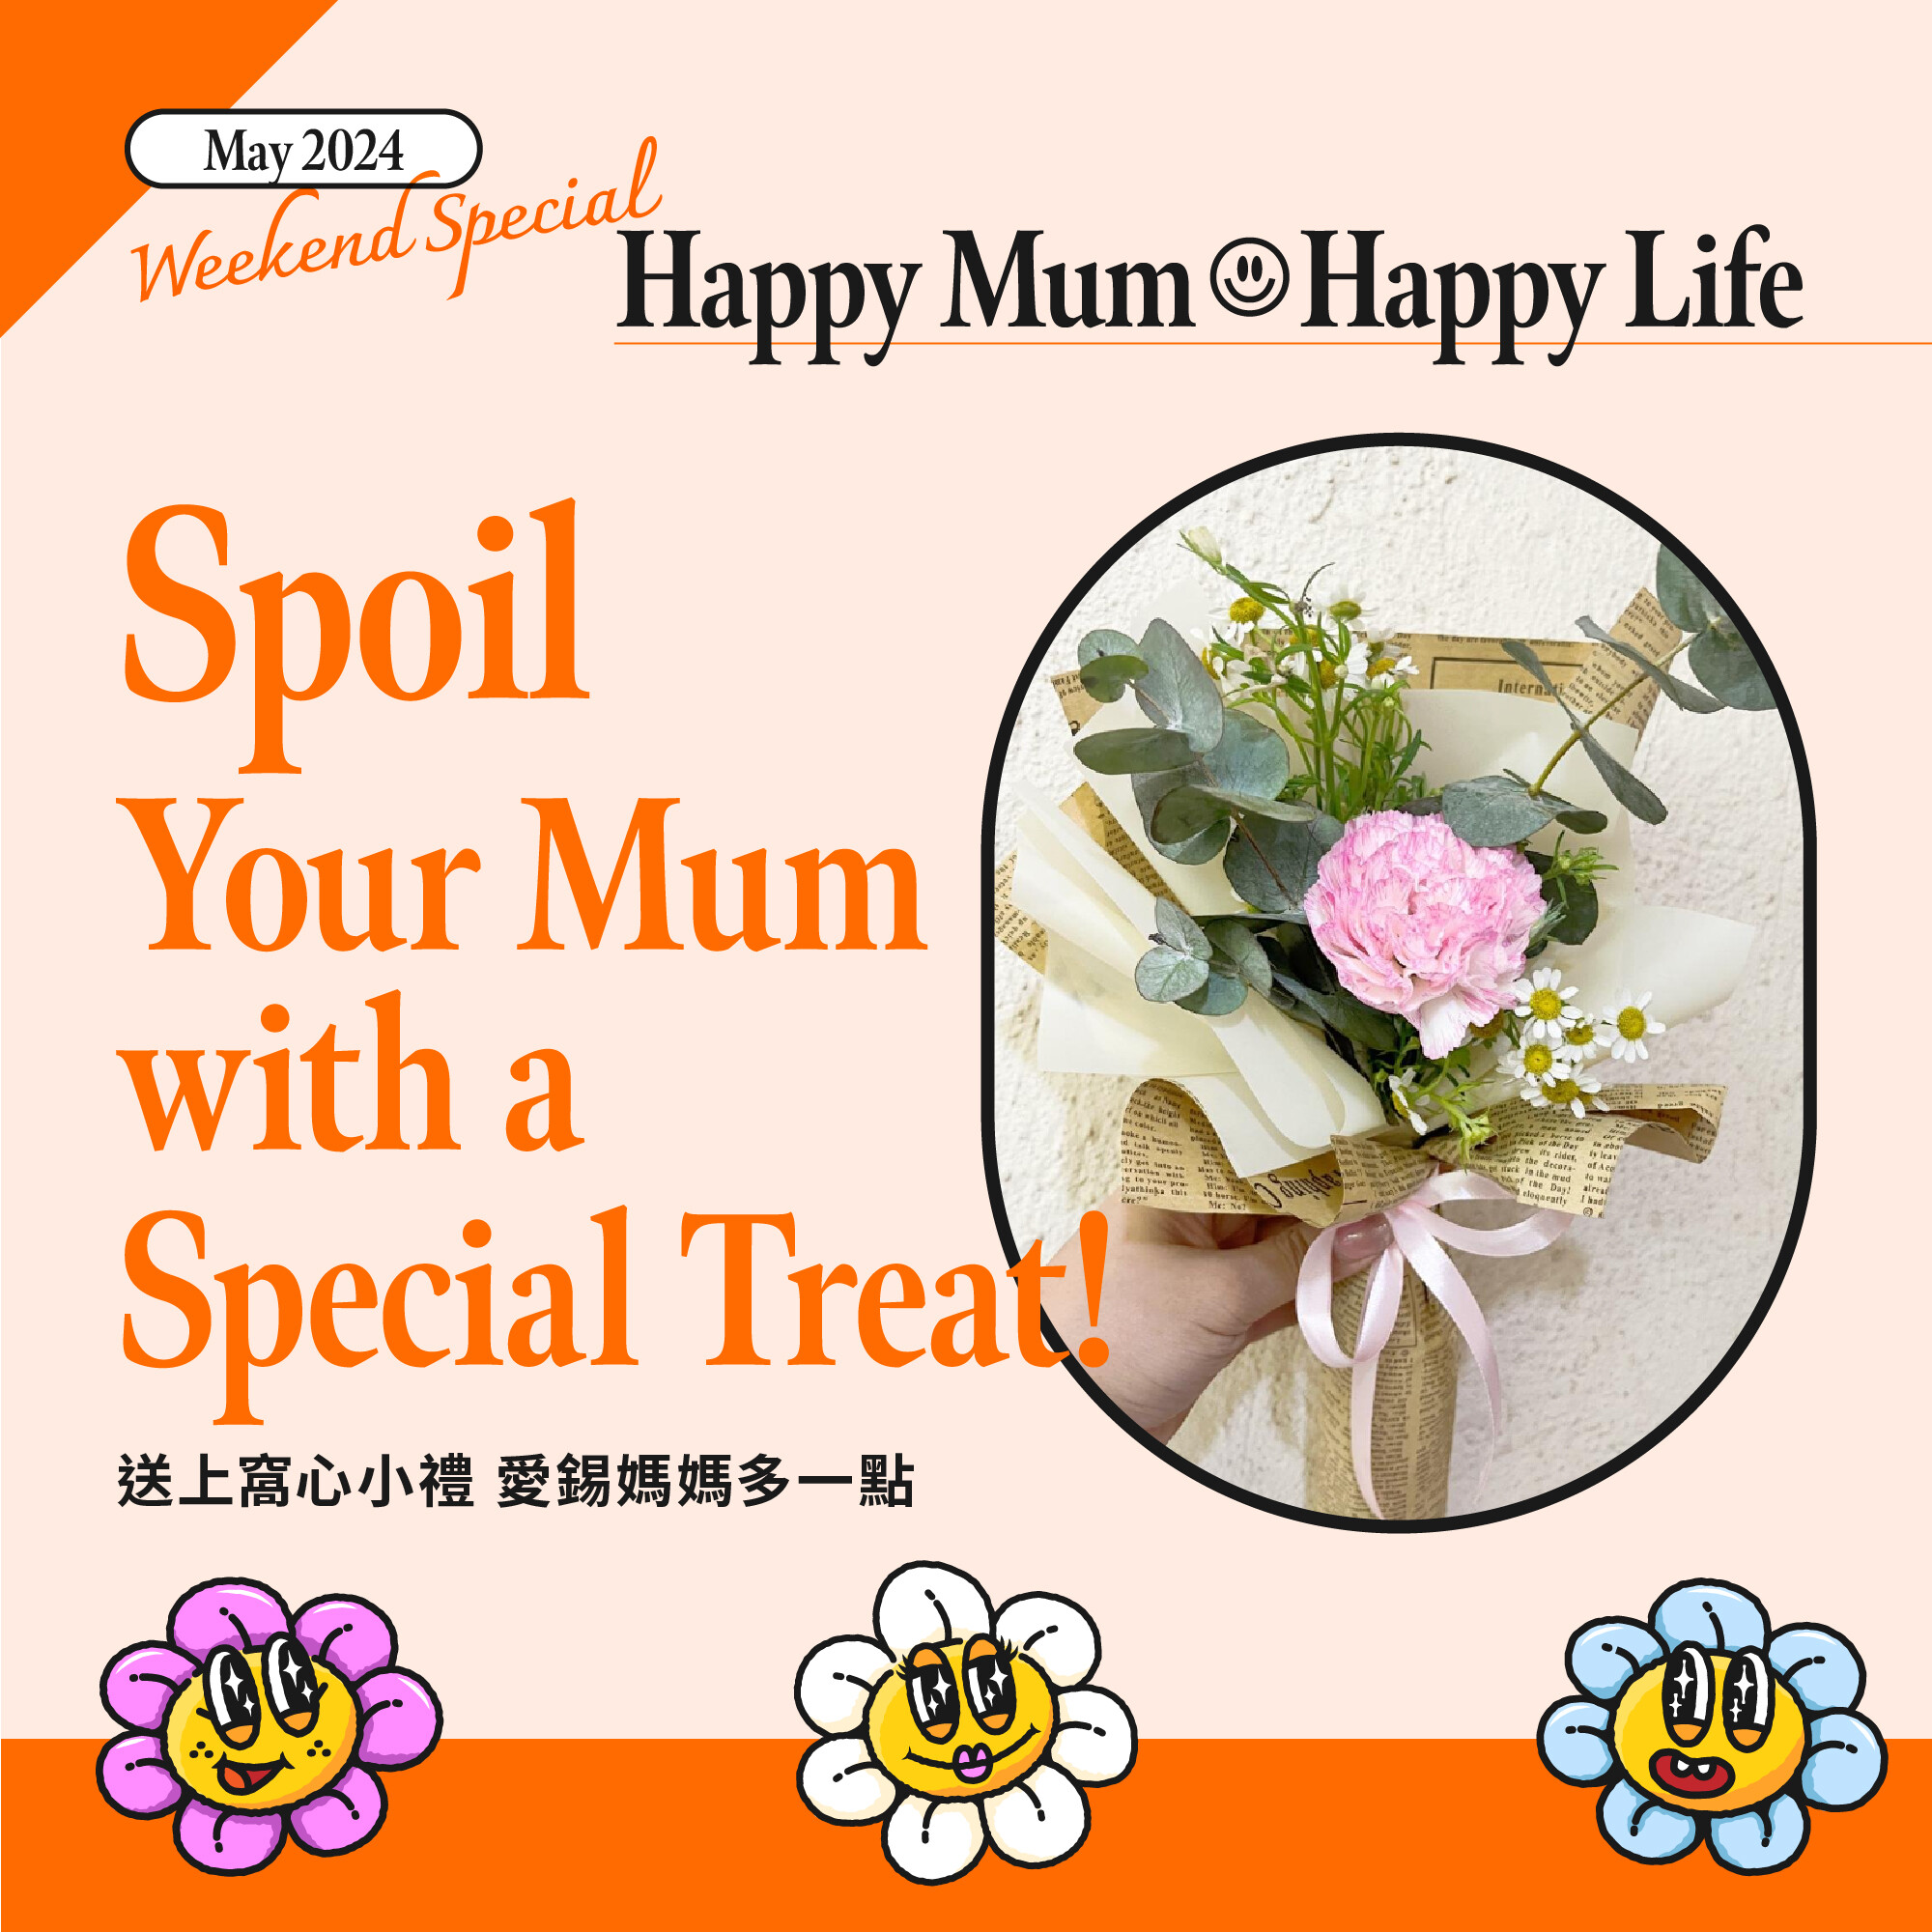 Spoil Mum with a Special Treat!